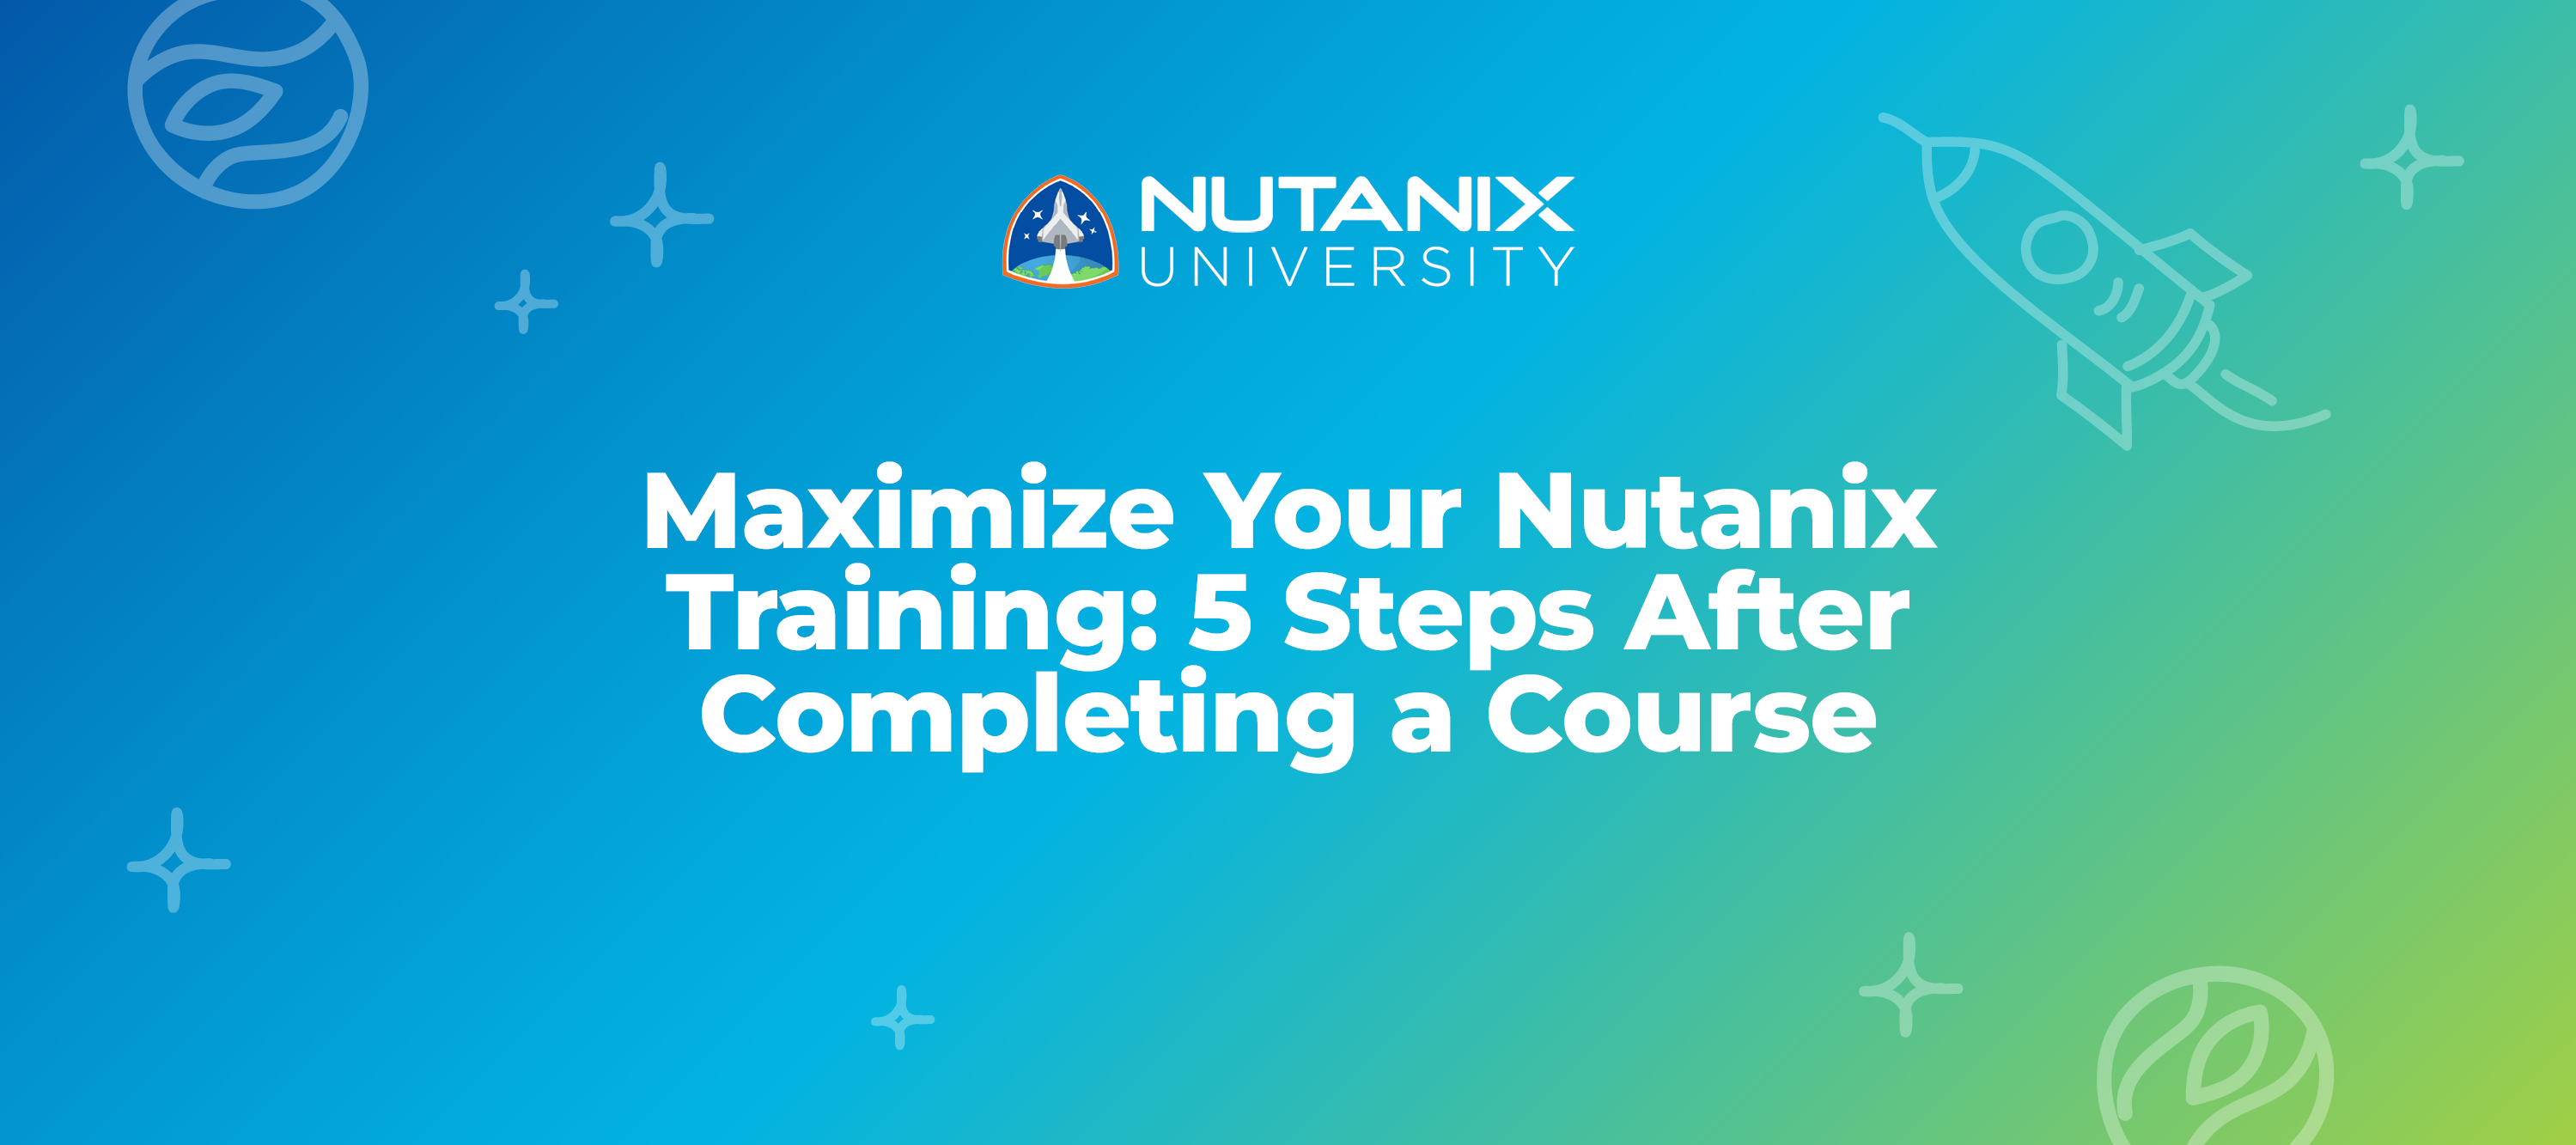 Maximize Your Nutanix Training: 5 Steps After Completing a Course